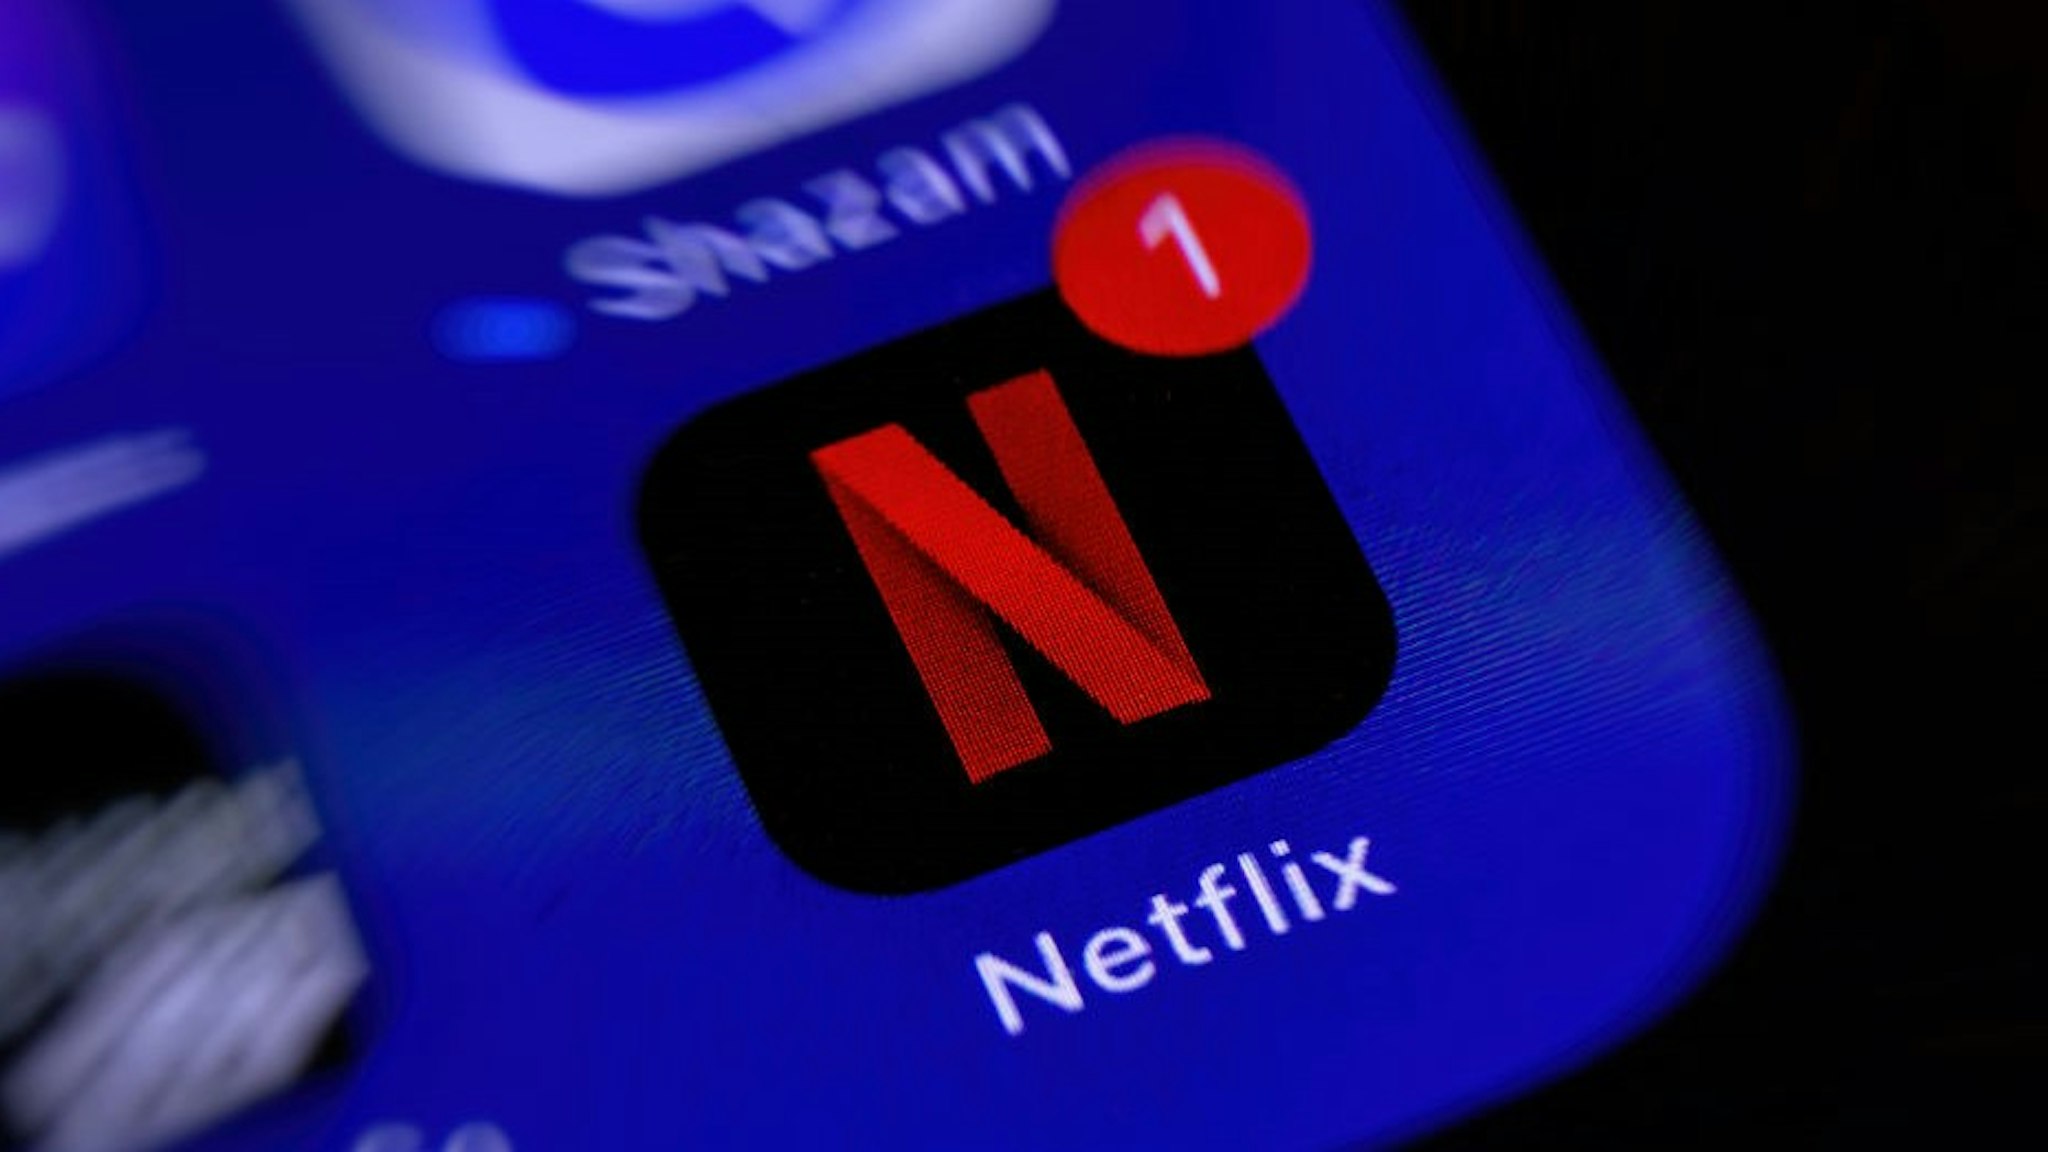 BOCHUM, GERMANY - MAY 11: (BILD ZEITUNG OUT) A smartphone screen is seen with the Streaming app Netflix on May 11, 2020 in Bochum, Germany. (Photo by